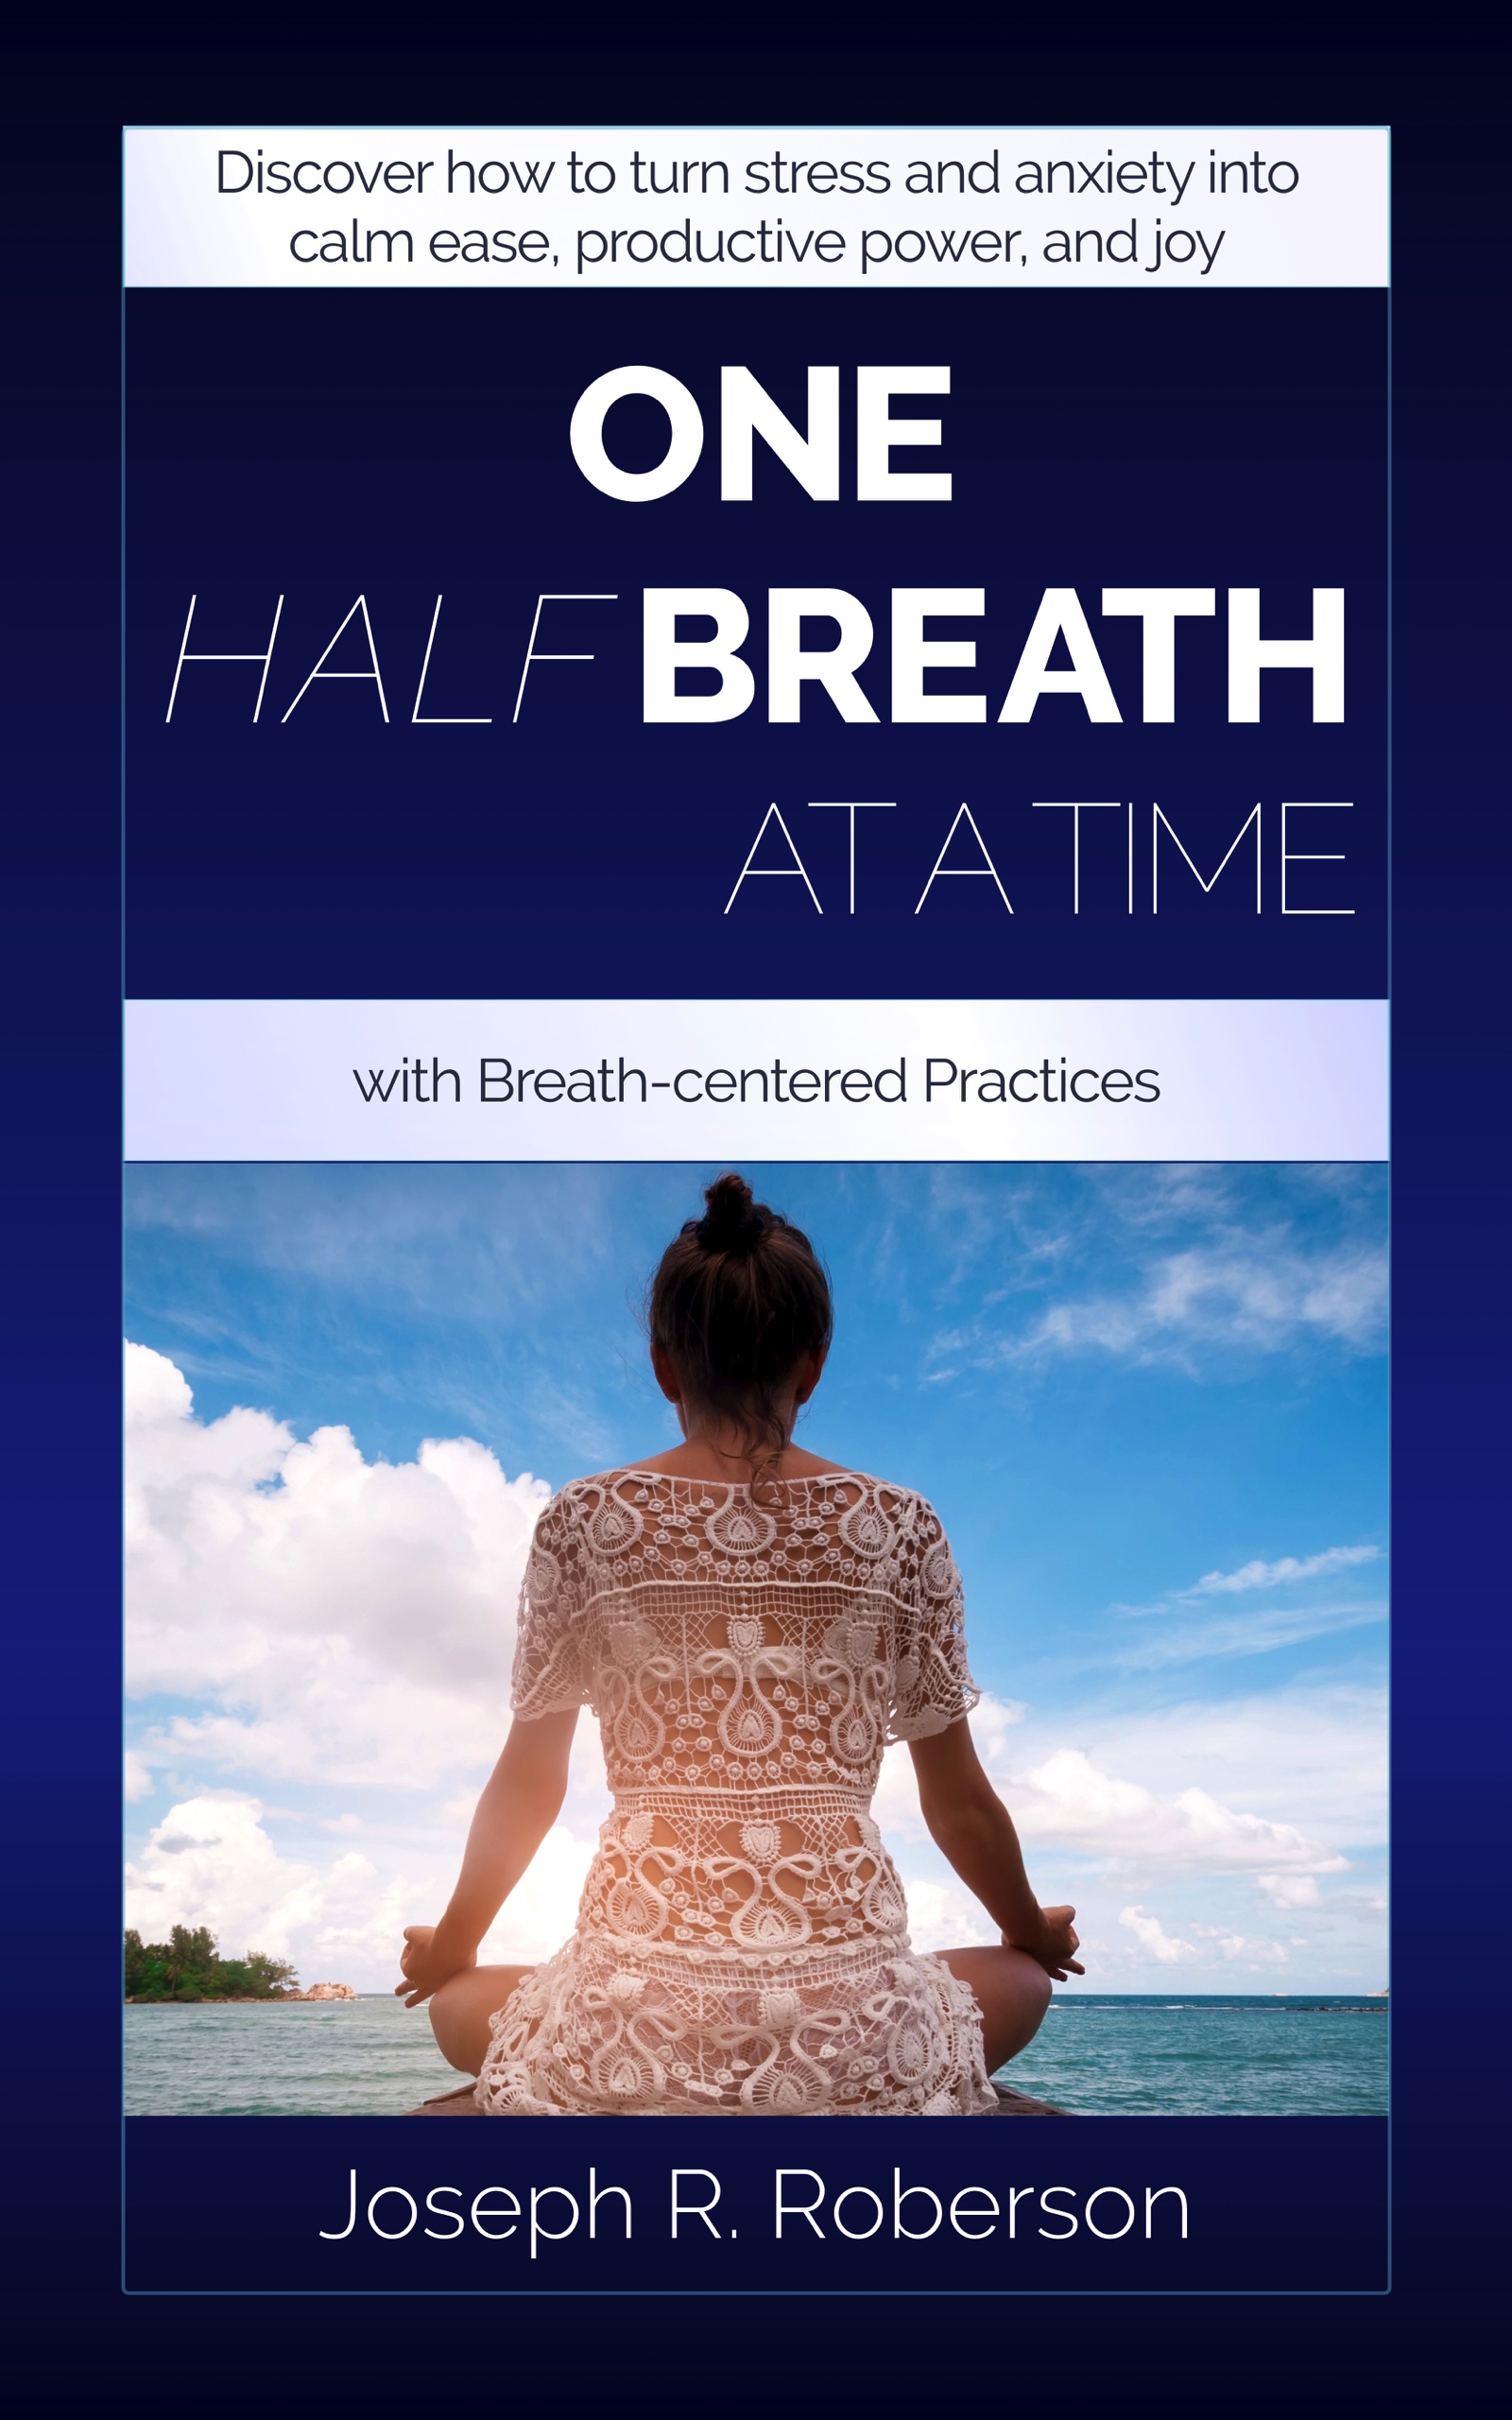 book cover: One Half-Breath At A Time: Discover how to turn stress and anxiety into calm ease, productive power, and radiant joy!